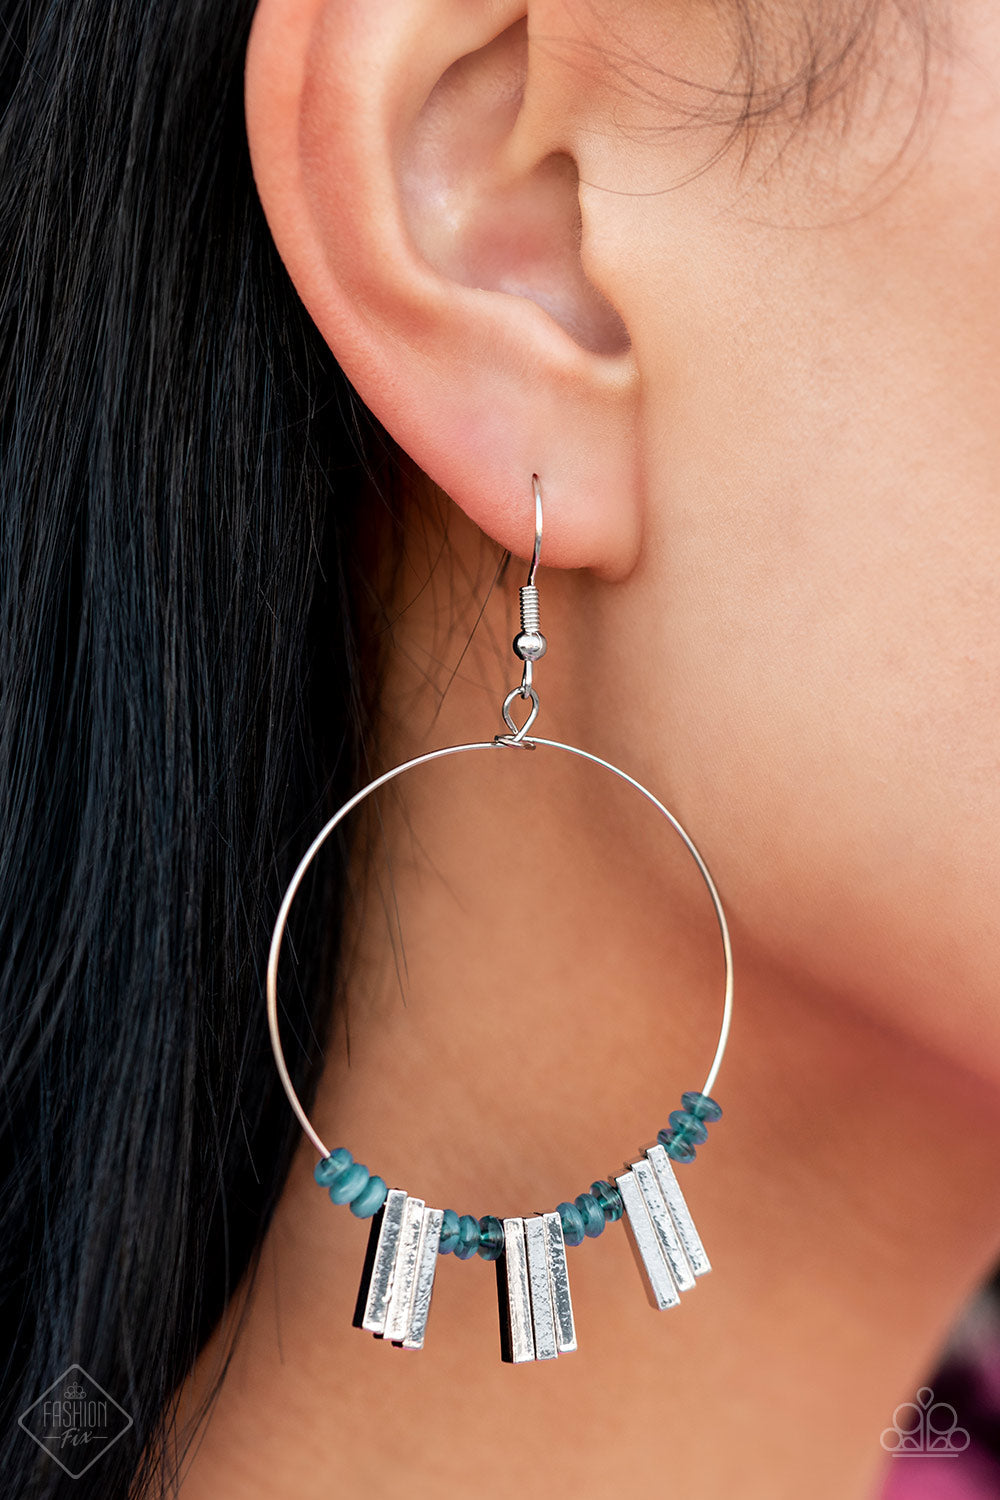 Paparazzi Accessories - Luxe Lagoon - Blue Earrings